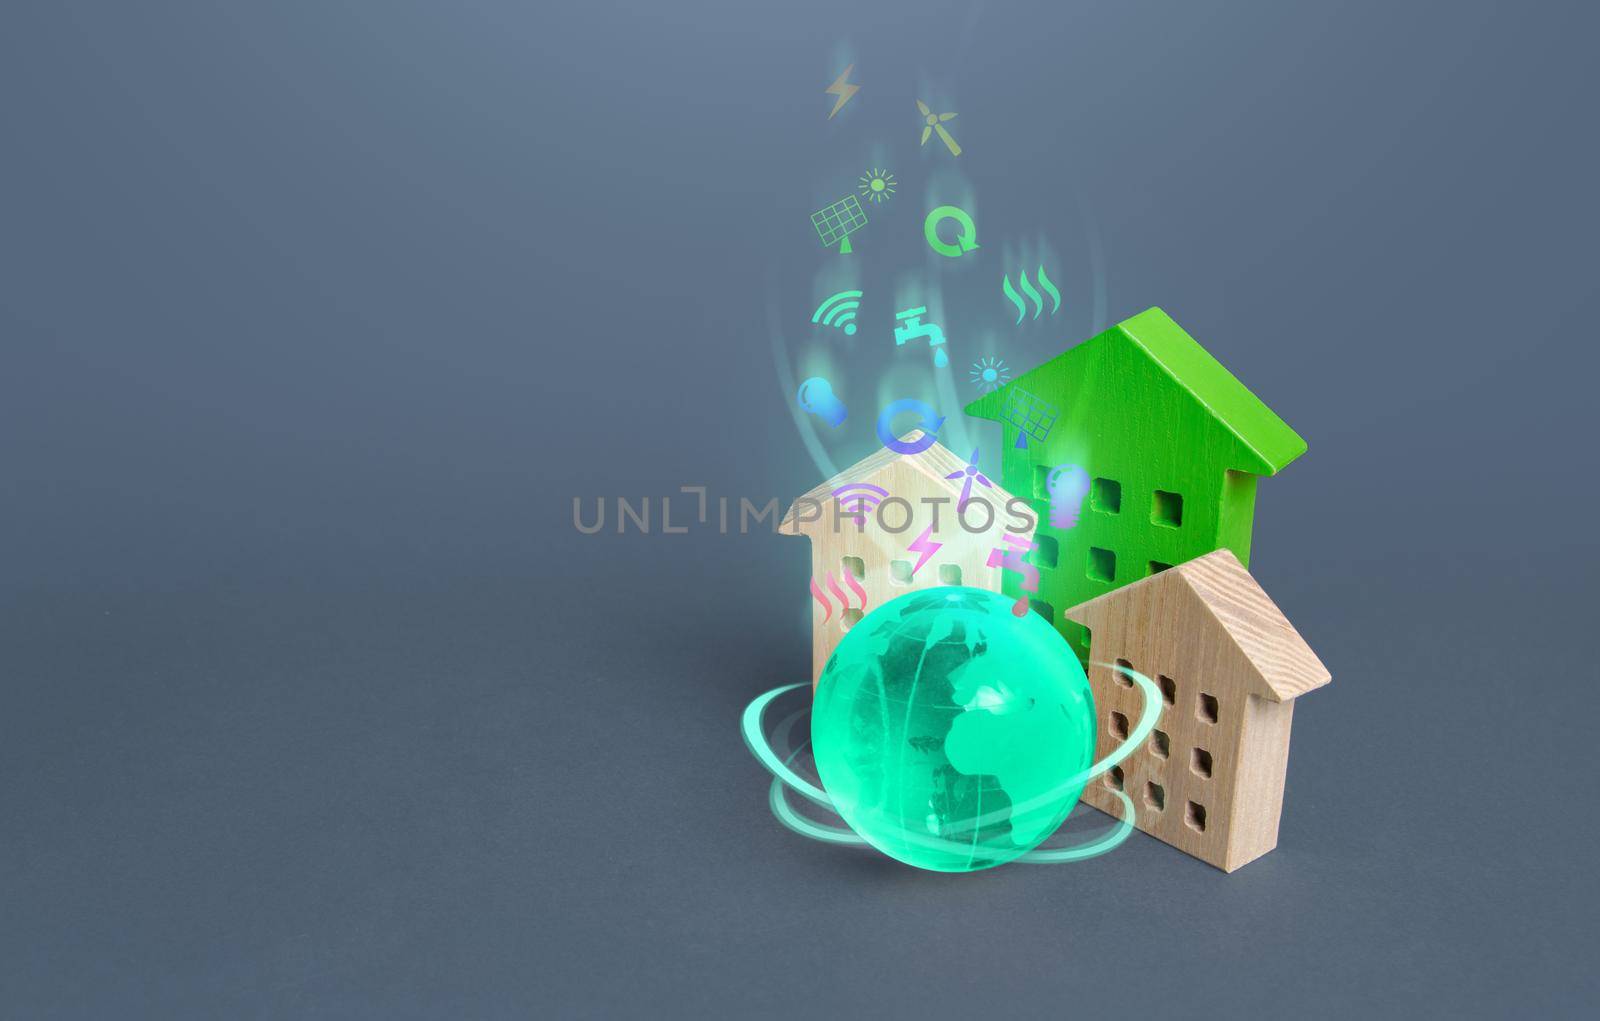 Residential building and globe with environmental symbols. Energy efficiency, autonomy and natural resources economy. Innovation and the Internet of Things. Use of renewable energy sources in housing.